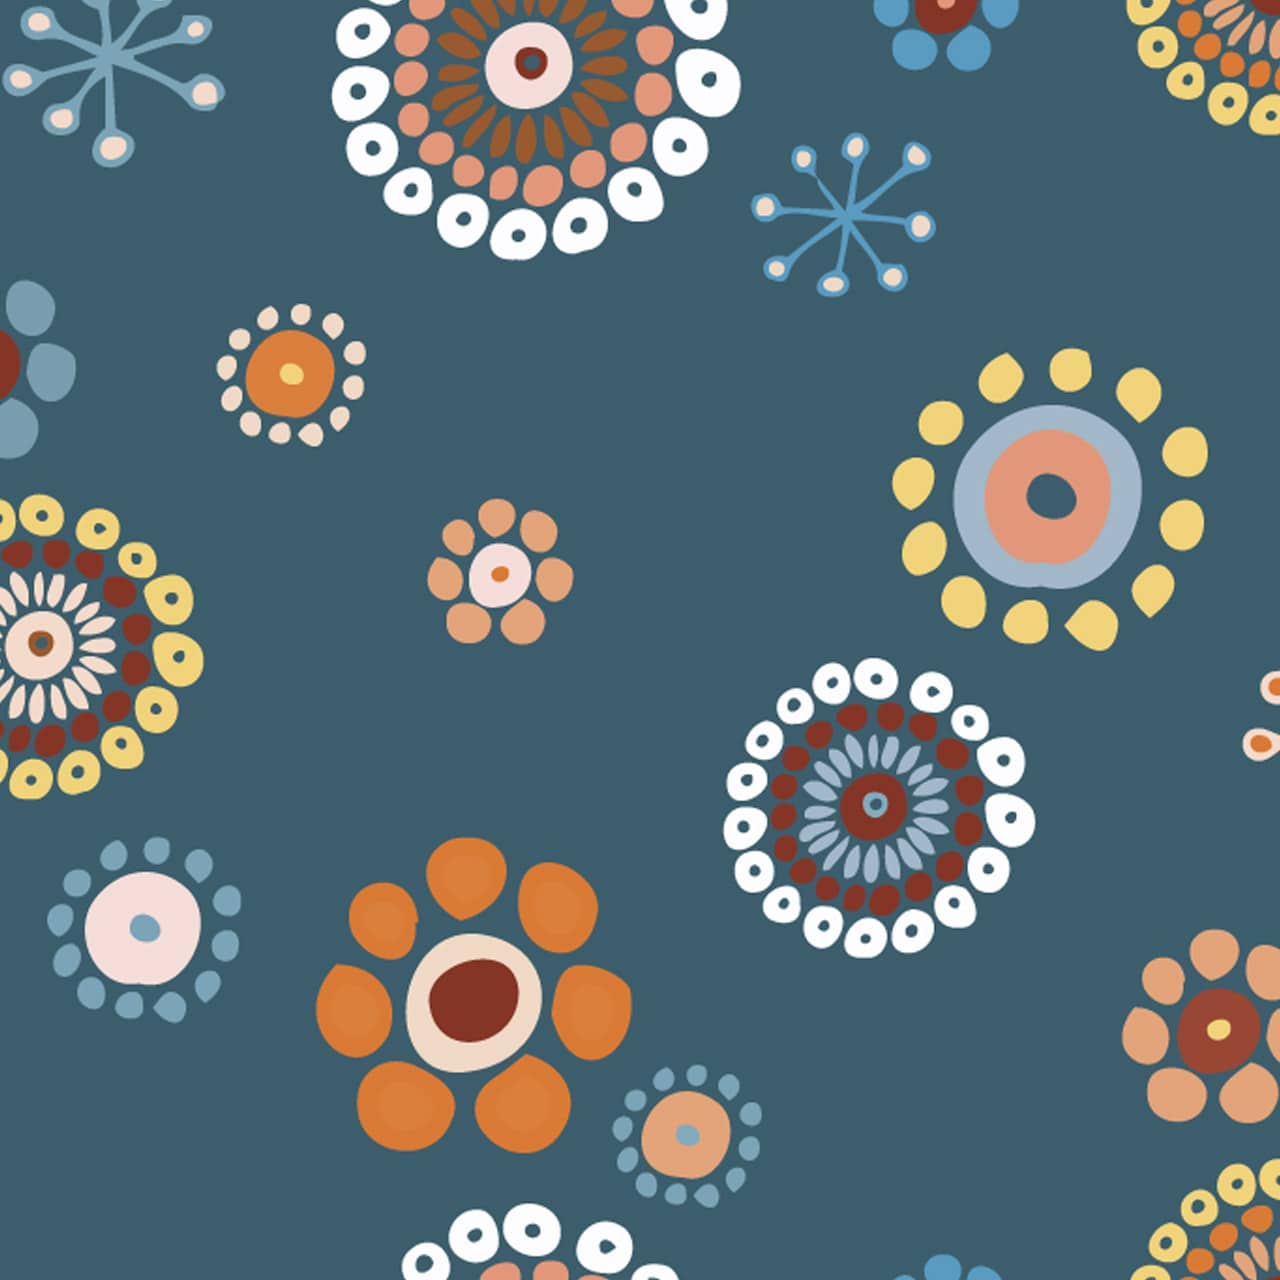 Scandi flowers in rich winter colours on  a dark teal cotton fabric - Broderi by Dashwood Studio